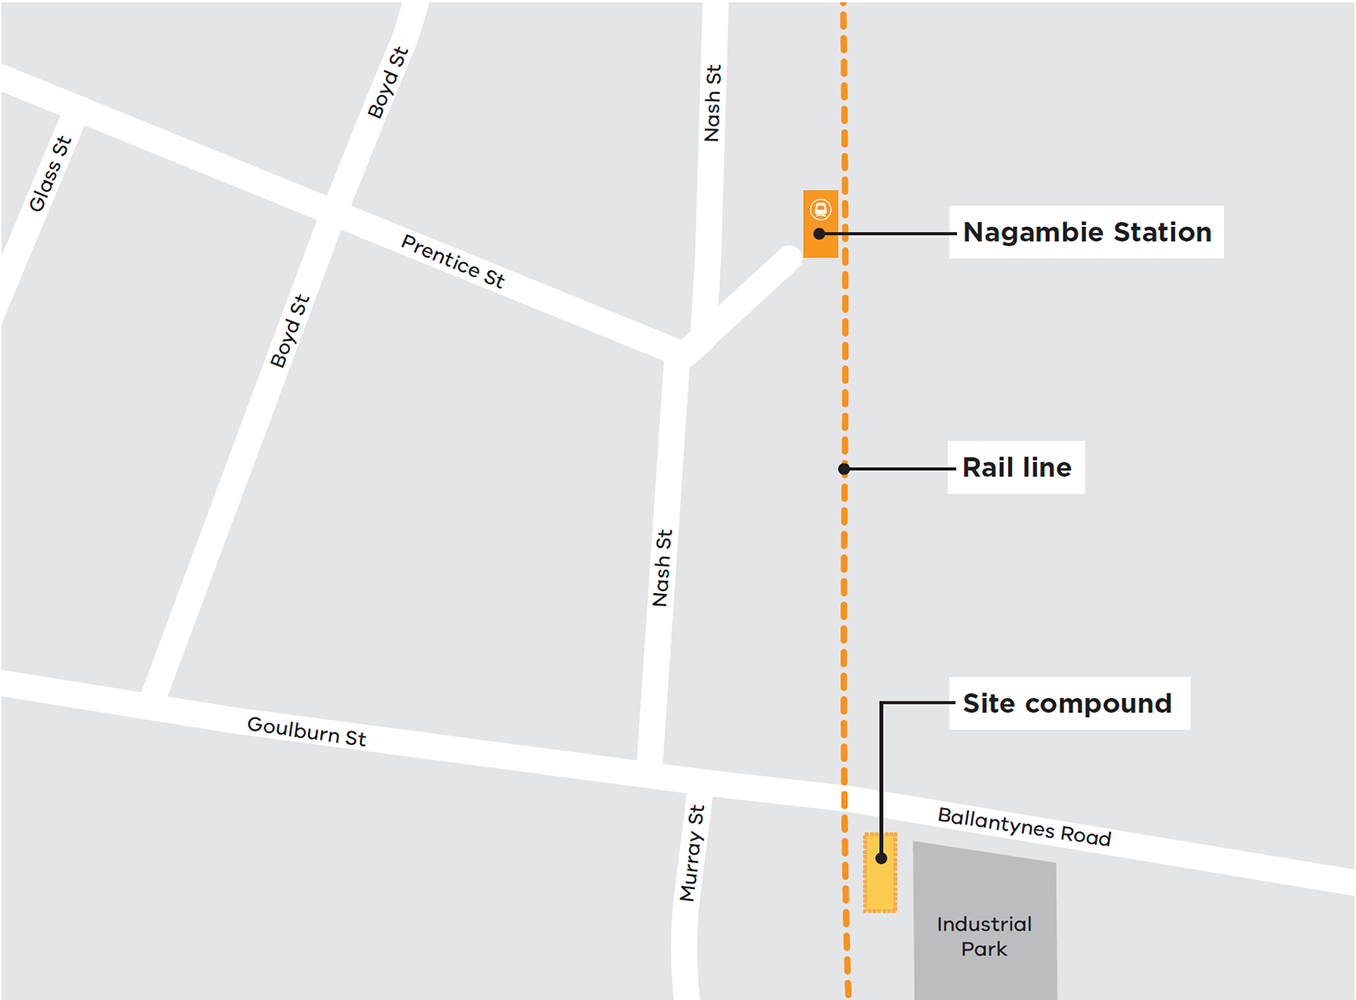 From 8 November, we will be setting up a construction site for Nagambie Station to prepare for the start of construction. The site will be located in the rail corridor on the southeast side of the level crossing on Ballantynes Road which will enable safe and direct access to the main work areas.